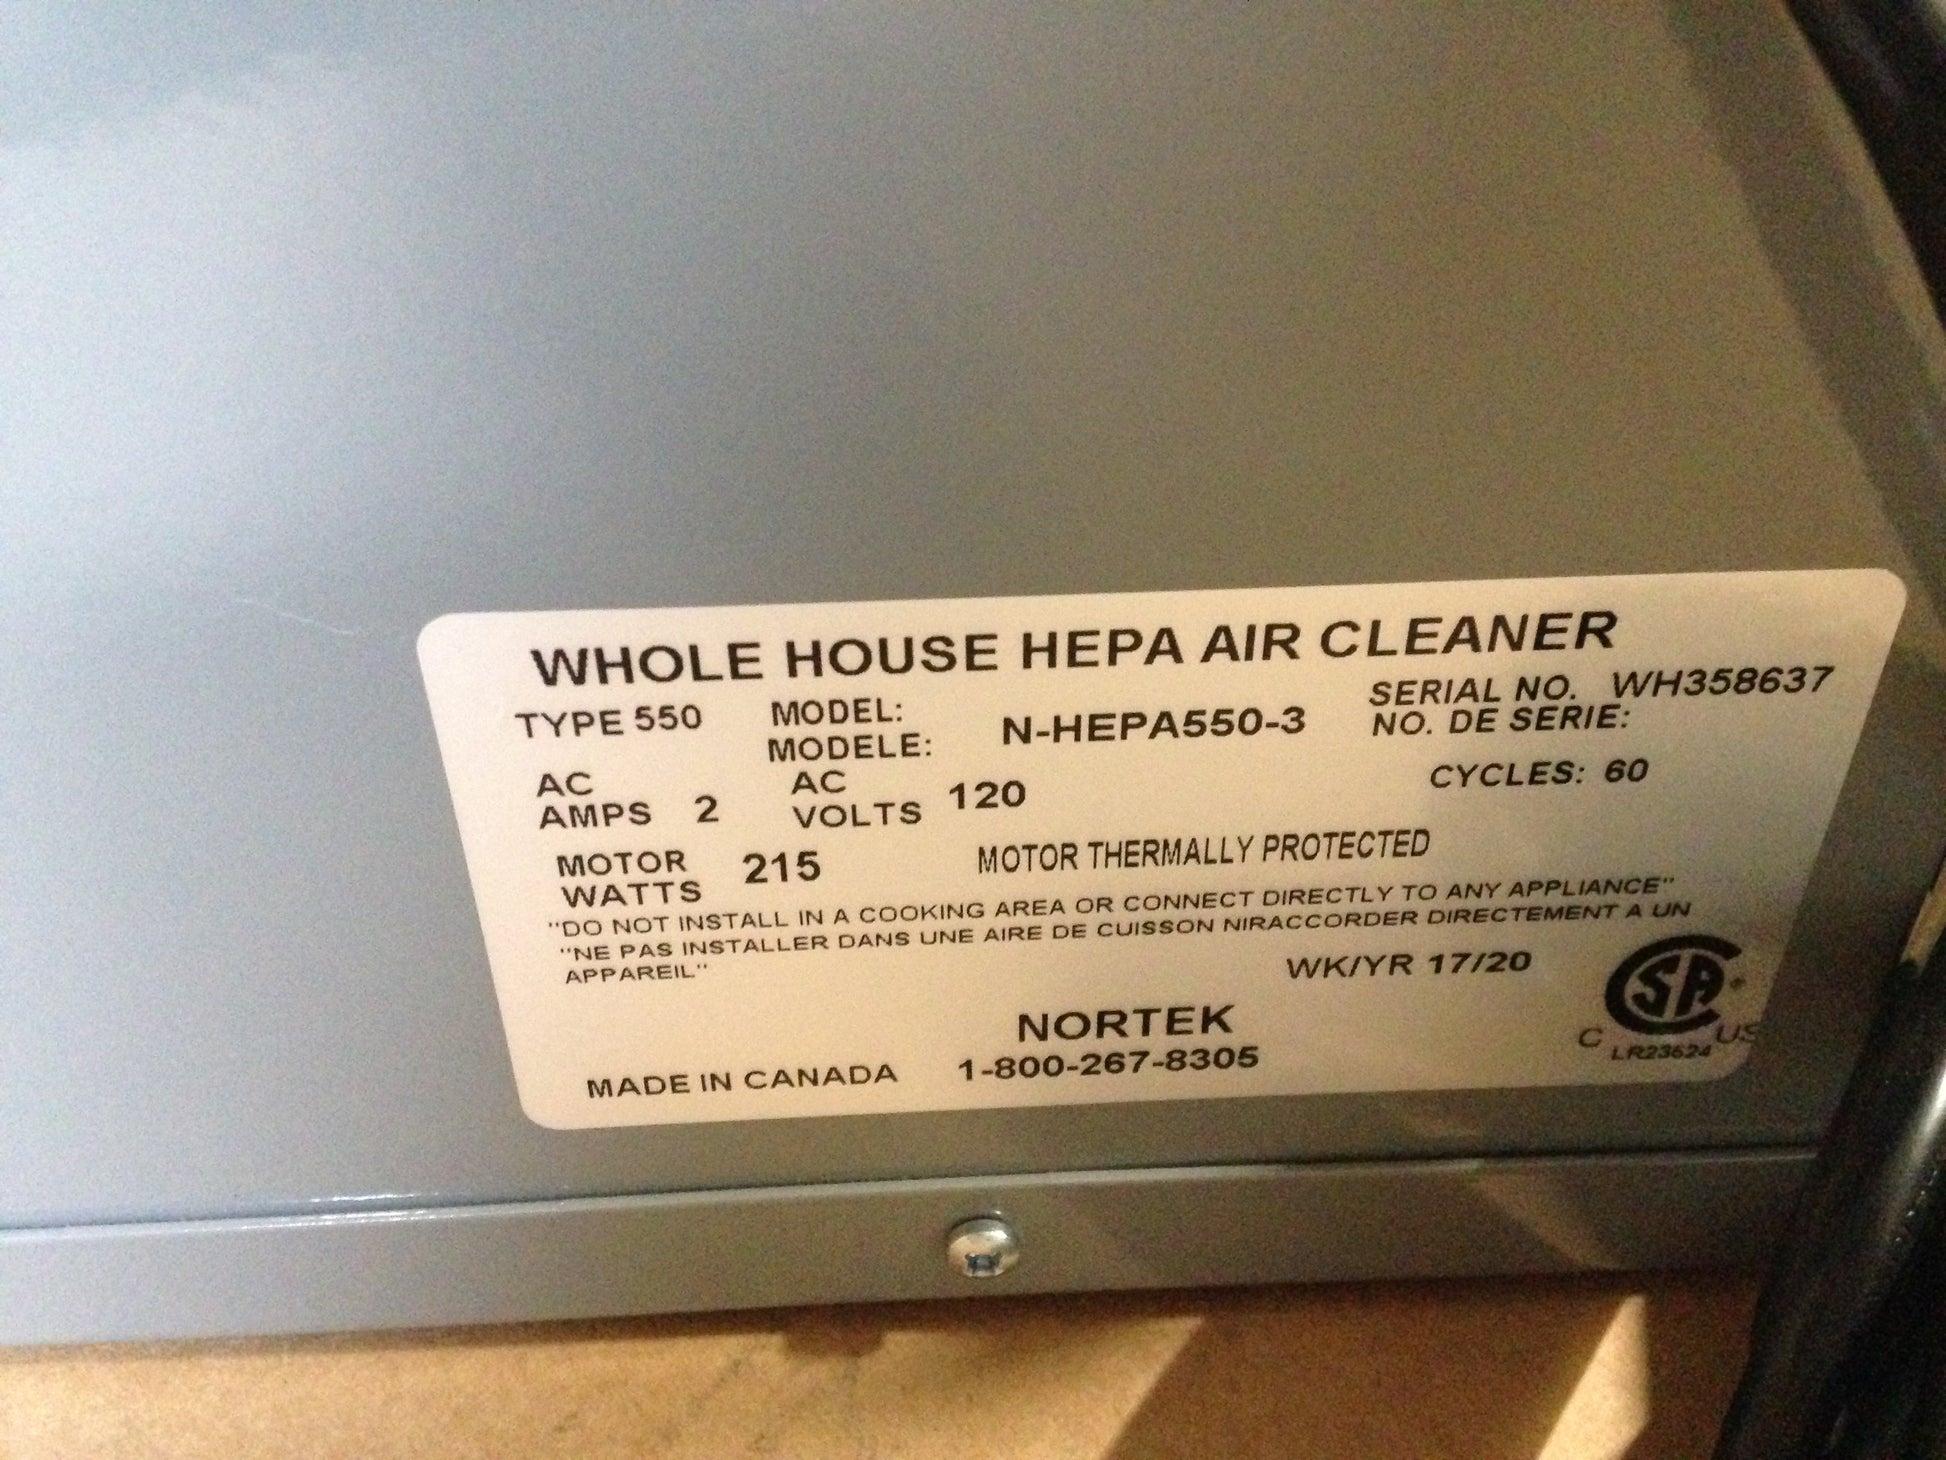 WHOLE HOUSE HEPA AIR CLEANER, 120/60/1, CFM:560